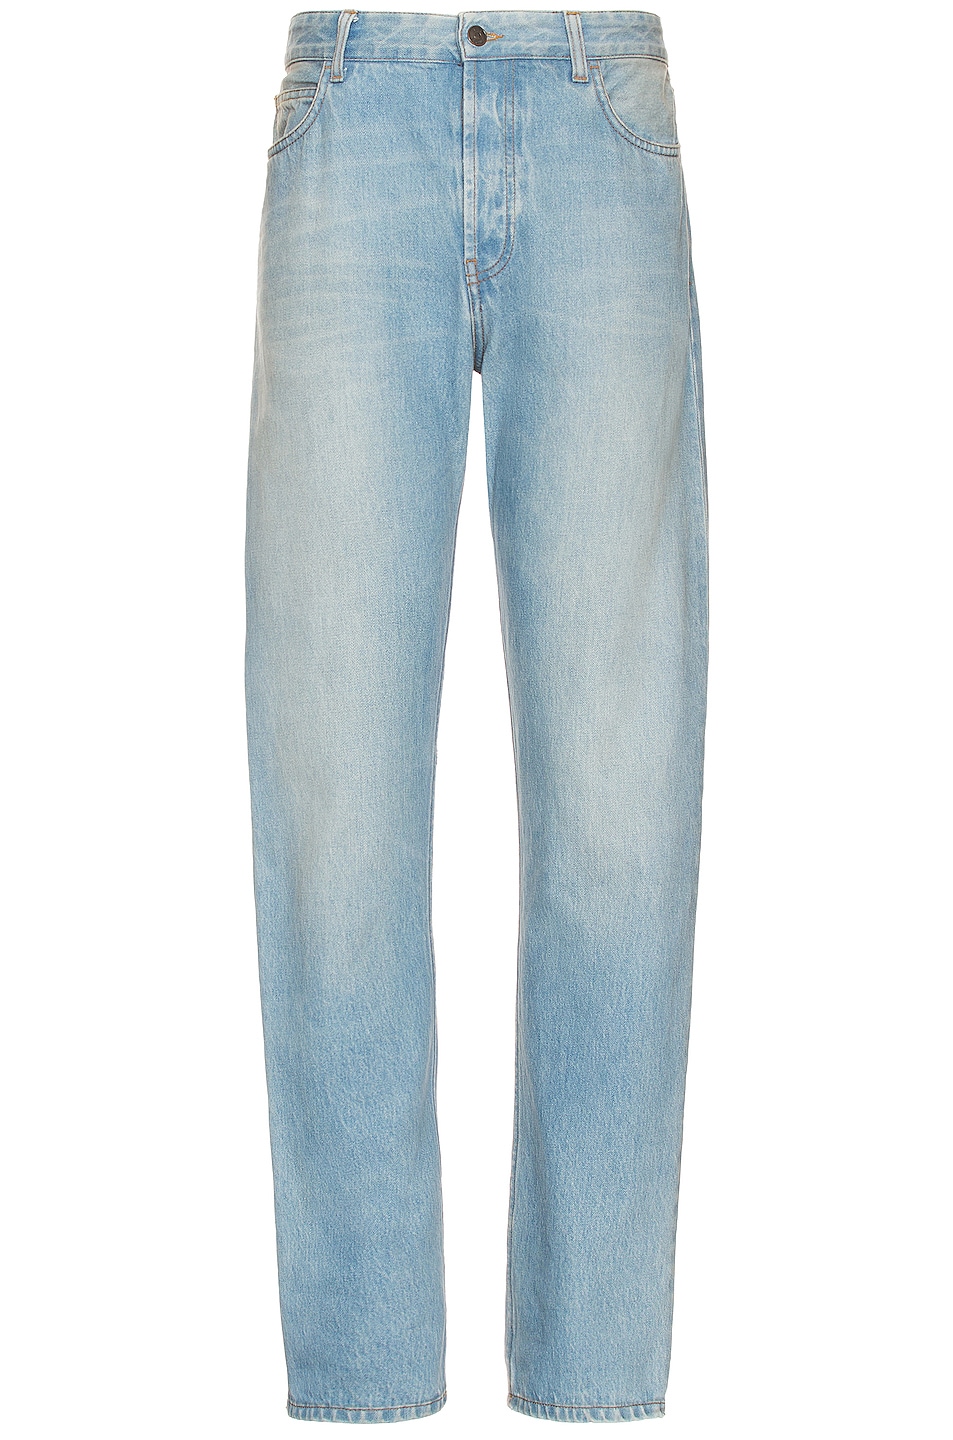 Image 1 of The Row Carlisle Jean in Washed Blue